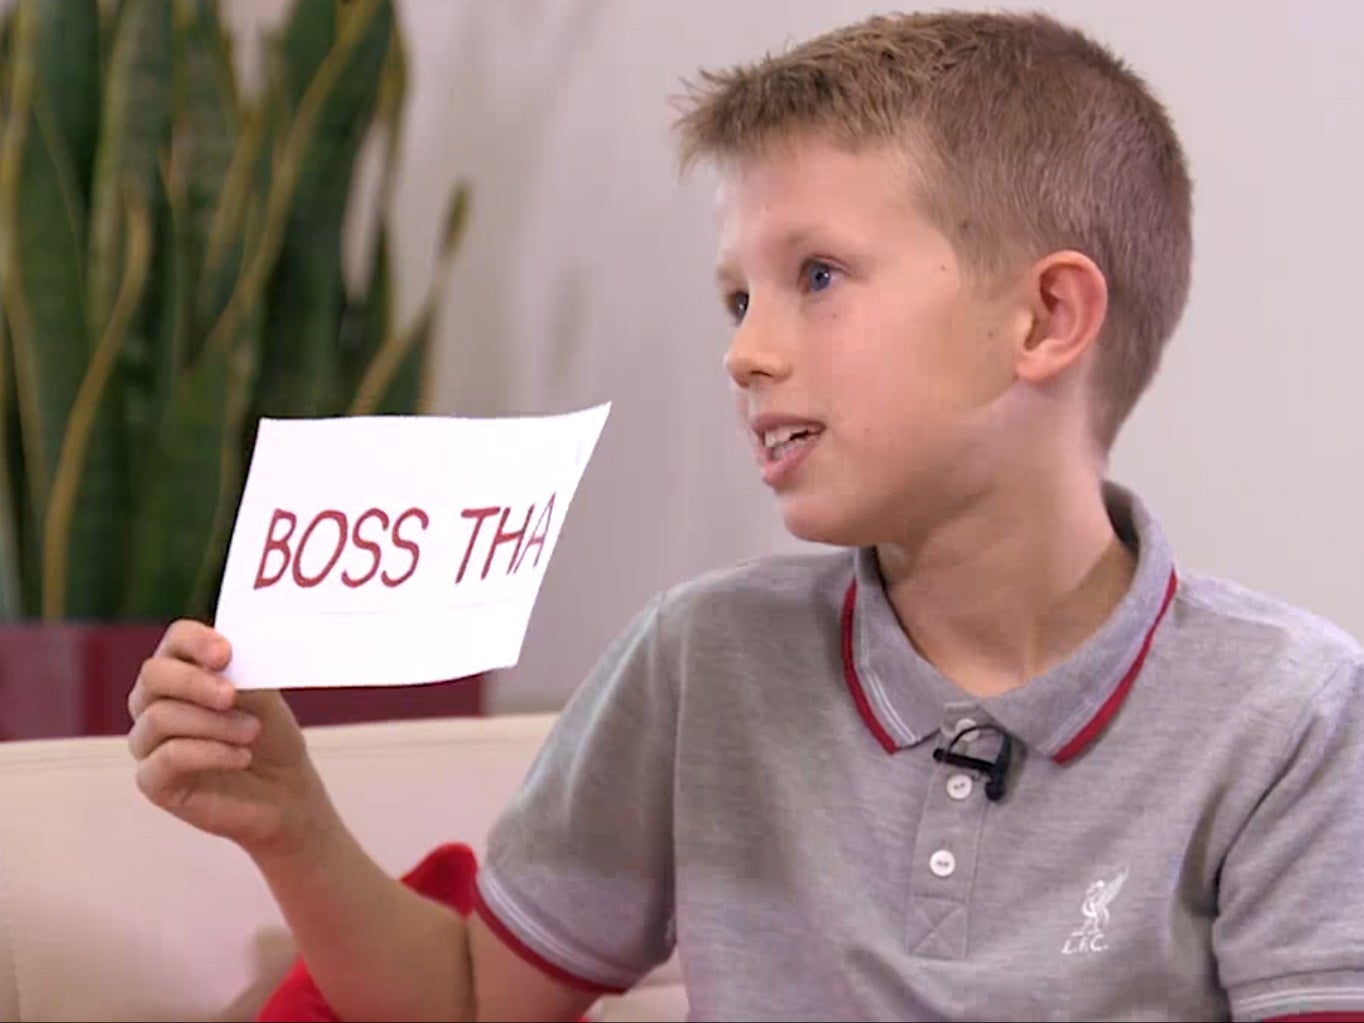 Liverpool TV has released a teaser video on their Facebook page of Klopp receiving a one-on-one lesson delivered by nine-year-old fan, Isaac.